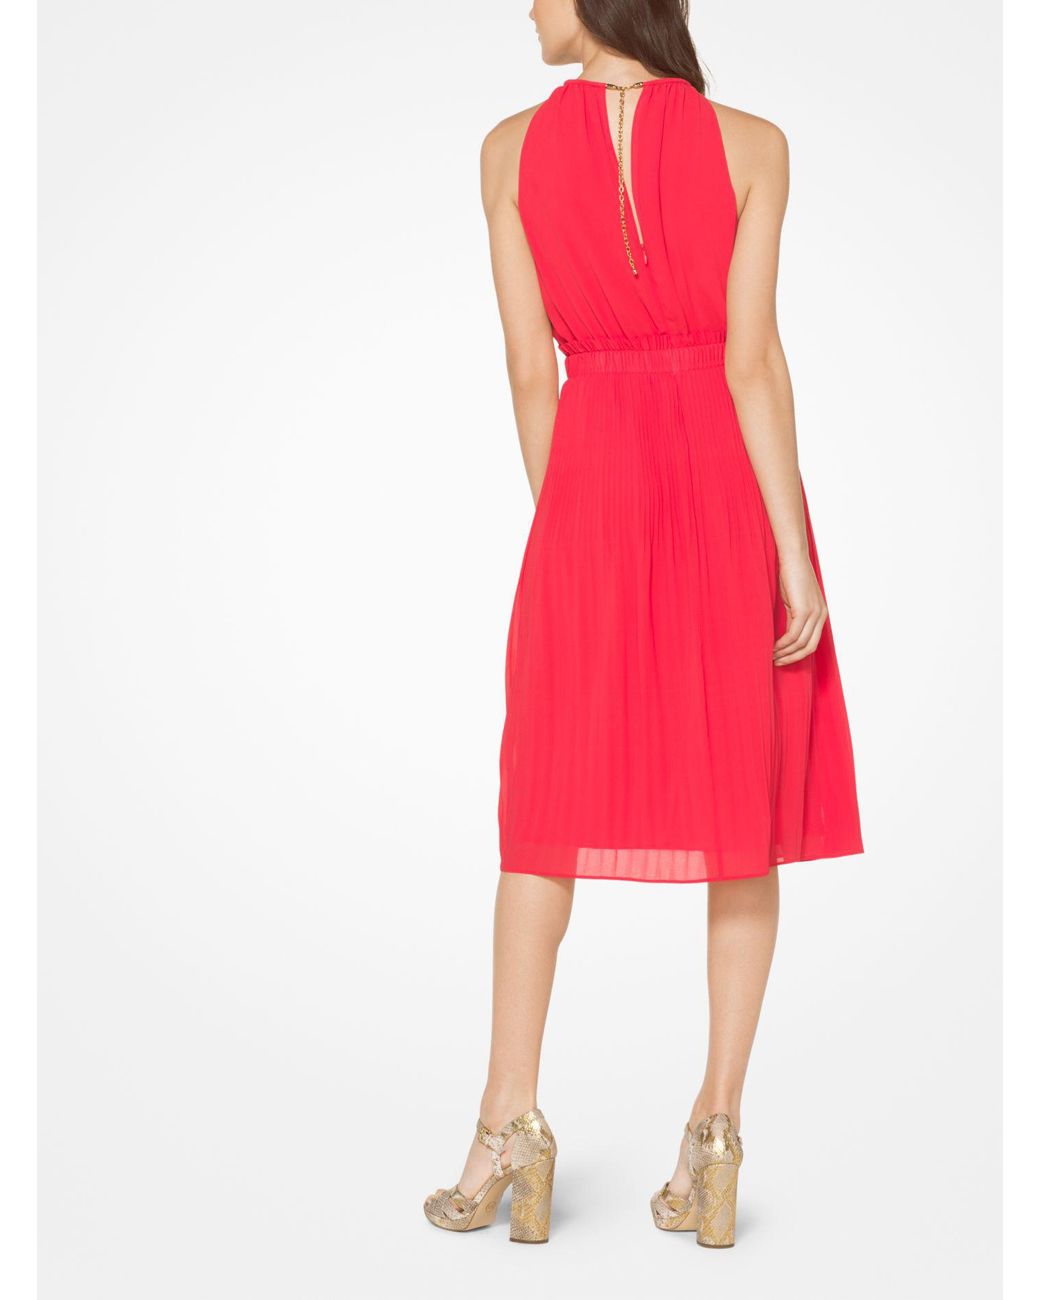 Michael Kors Synthetic Georgette Pleated Halter Dress in Red | Lyst